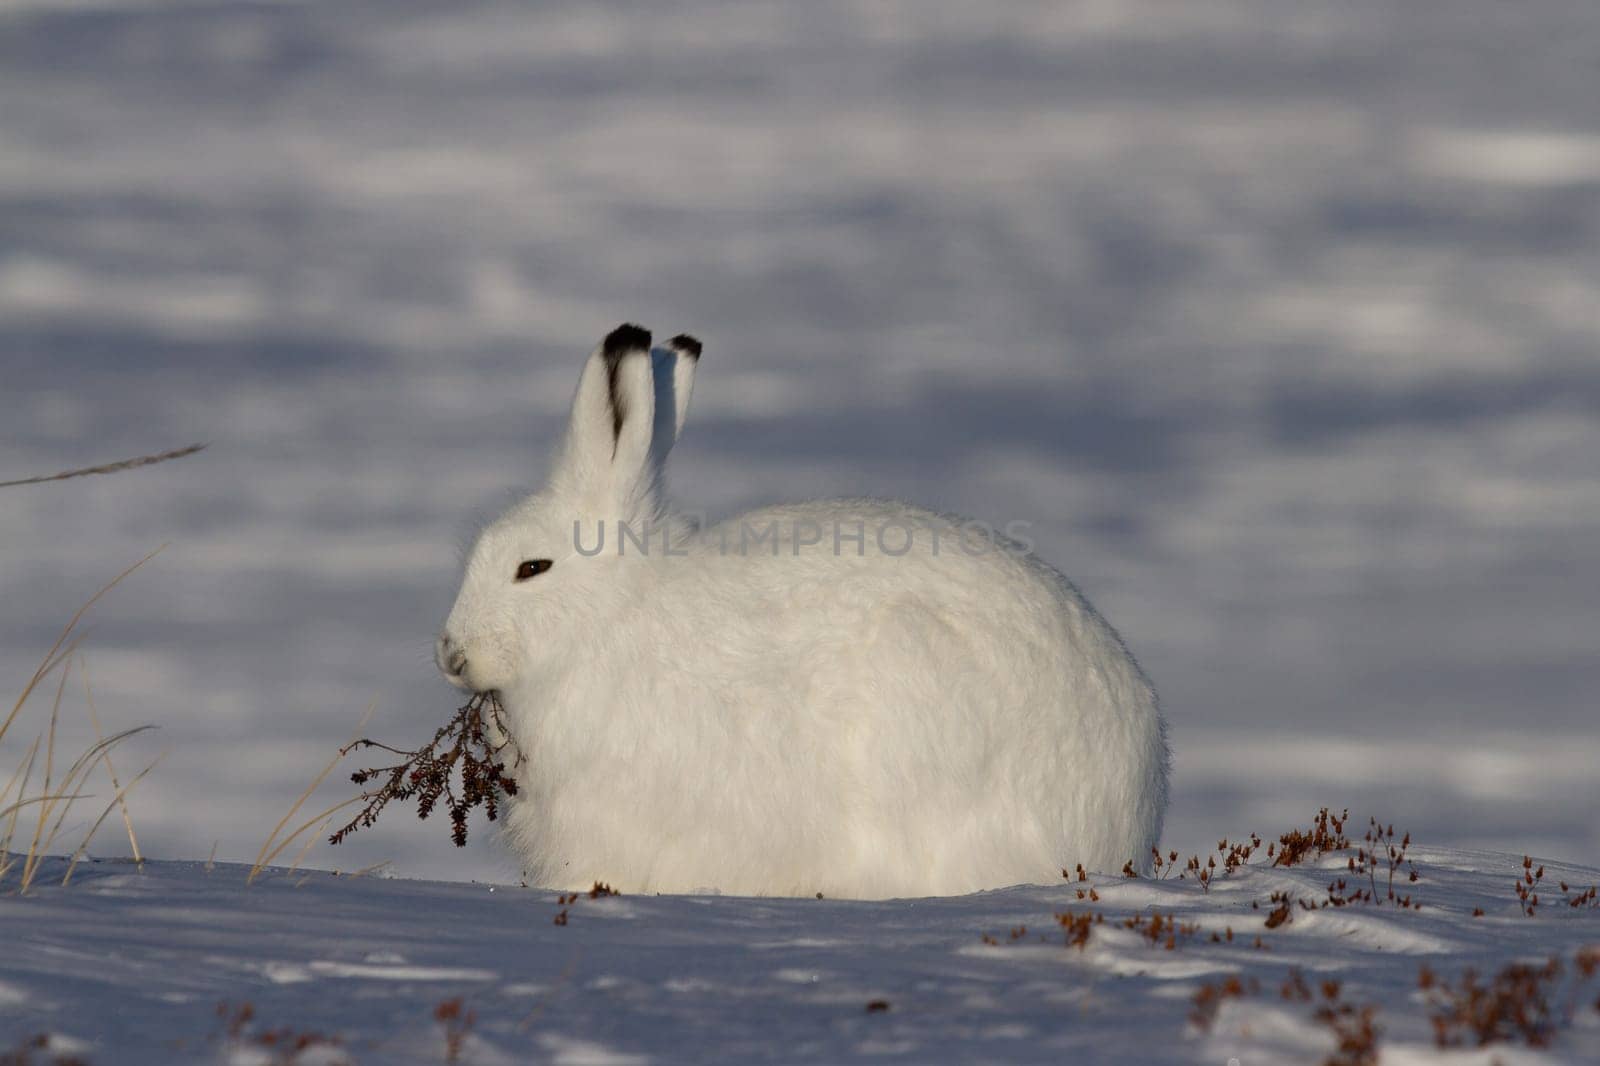 Arctic hare or Lepus arcticus in winter coat chewing on a willow branch with snow in the background, near Arviat, Nunavut, Canada